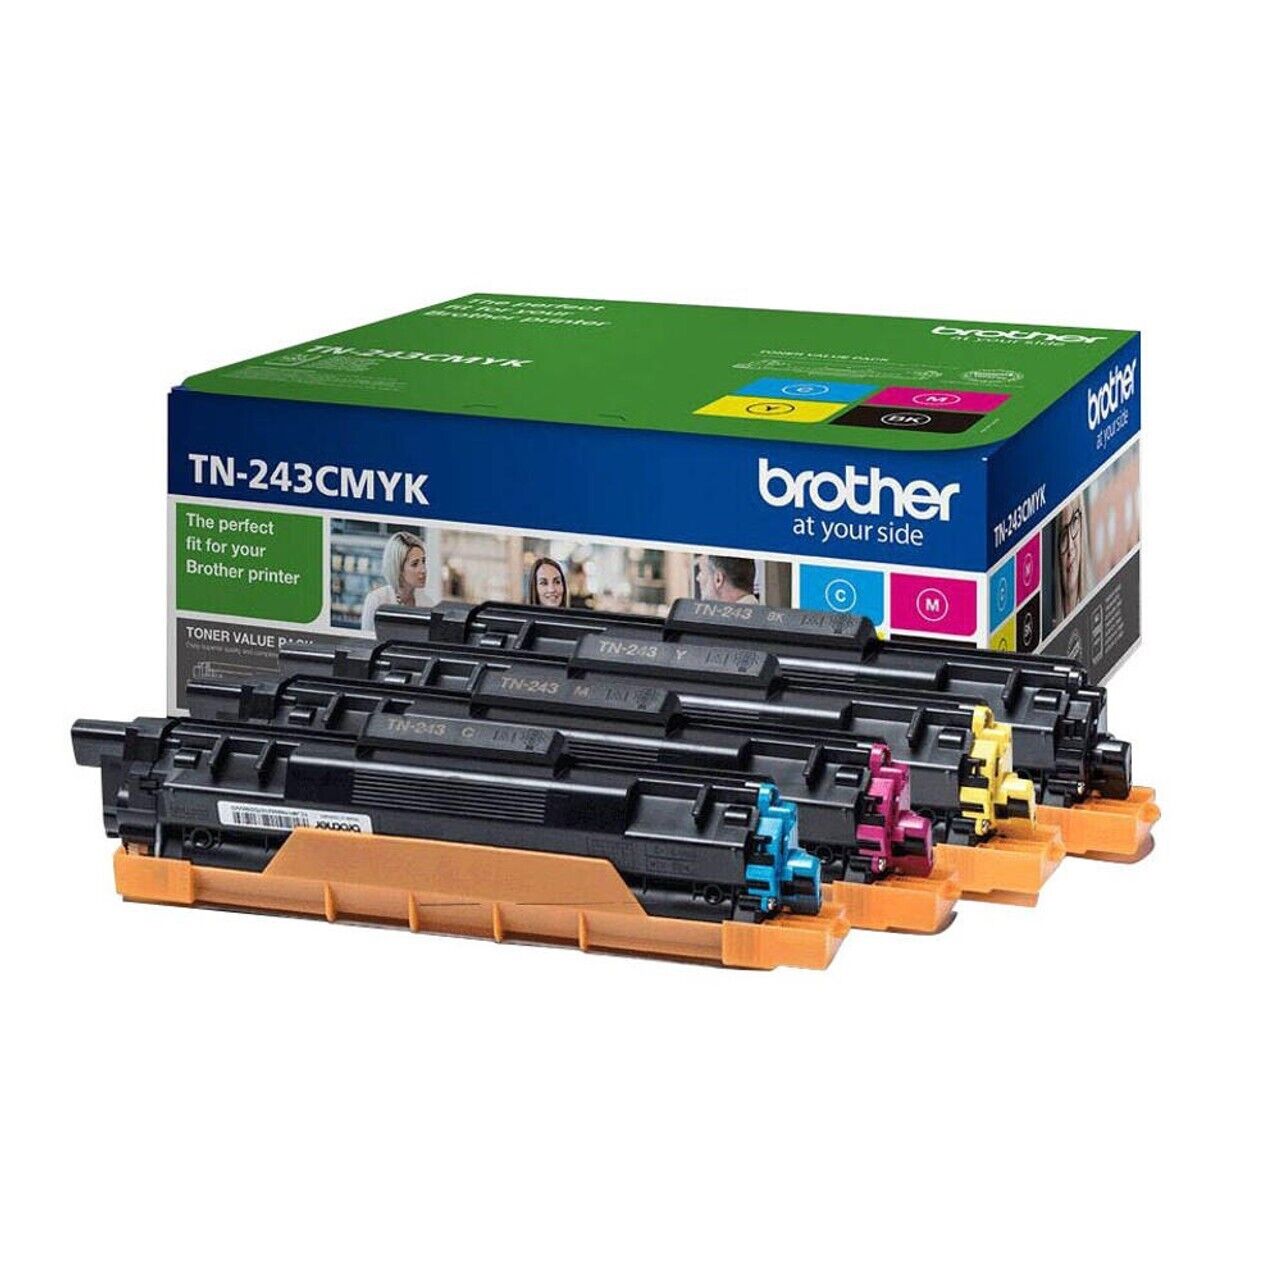 Genuine Brother TN-243 CMYK Toner Cartridge For Brother